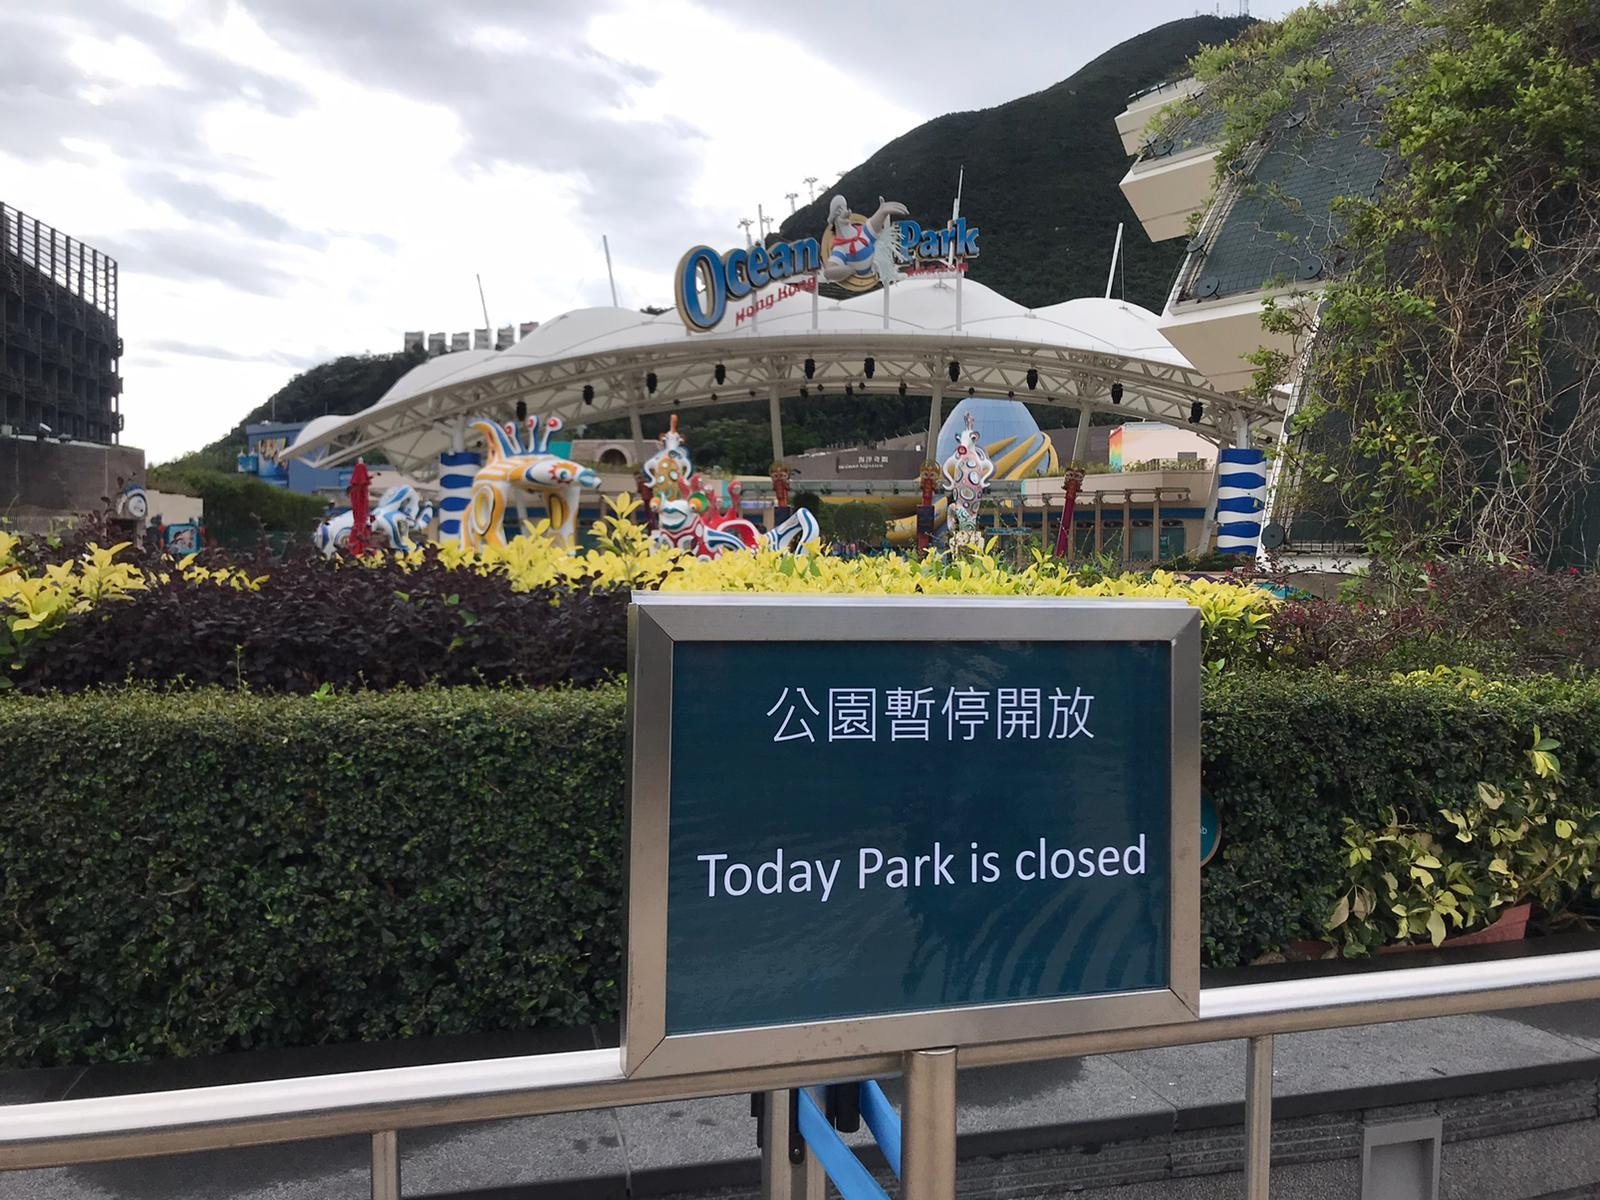 Ocean Park has been temporarily closed since January 26 as a precaution against the outbreak of the new coronavirus. Photo: Chan Ho-him